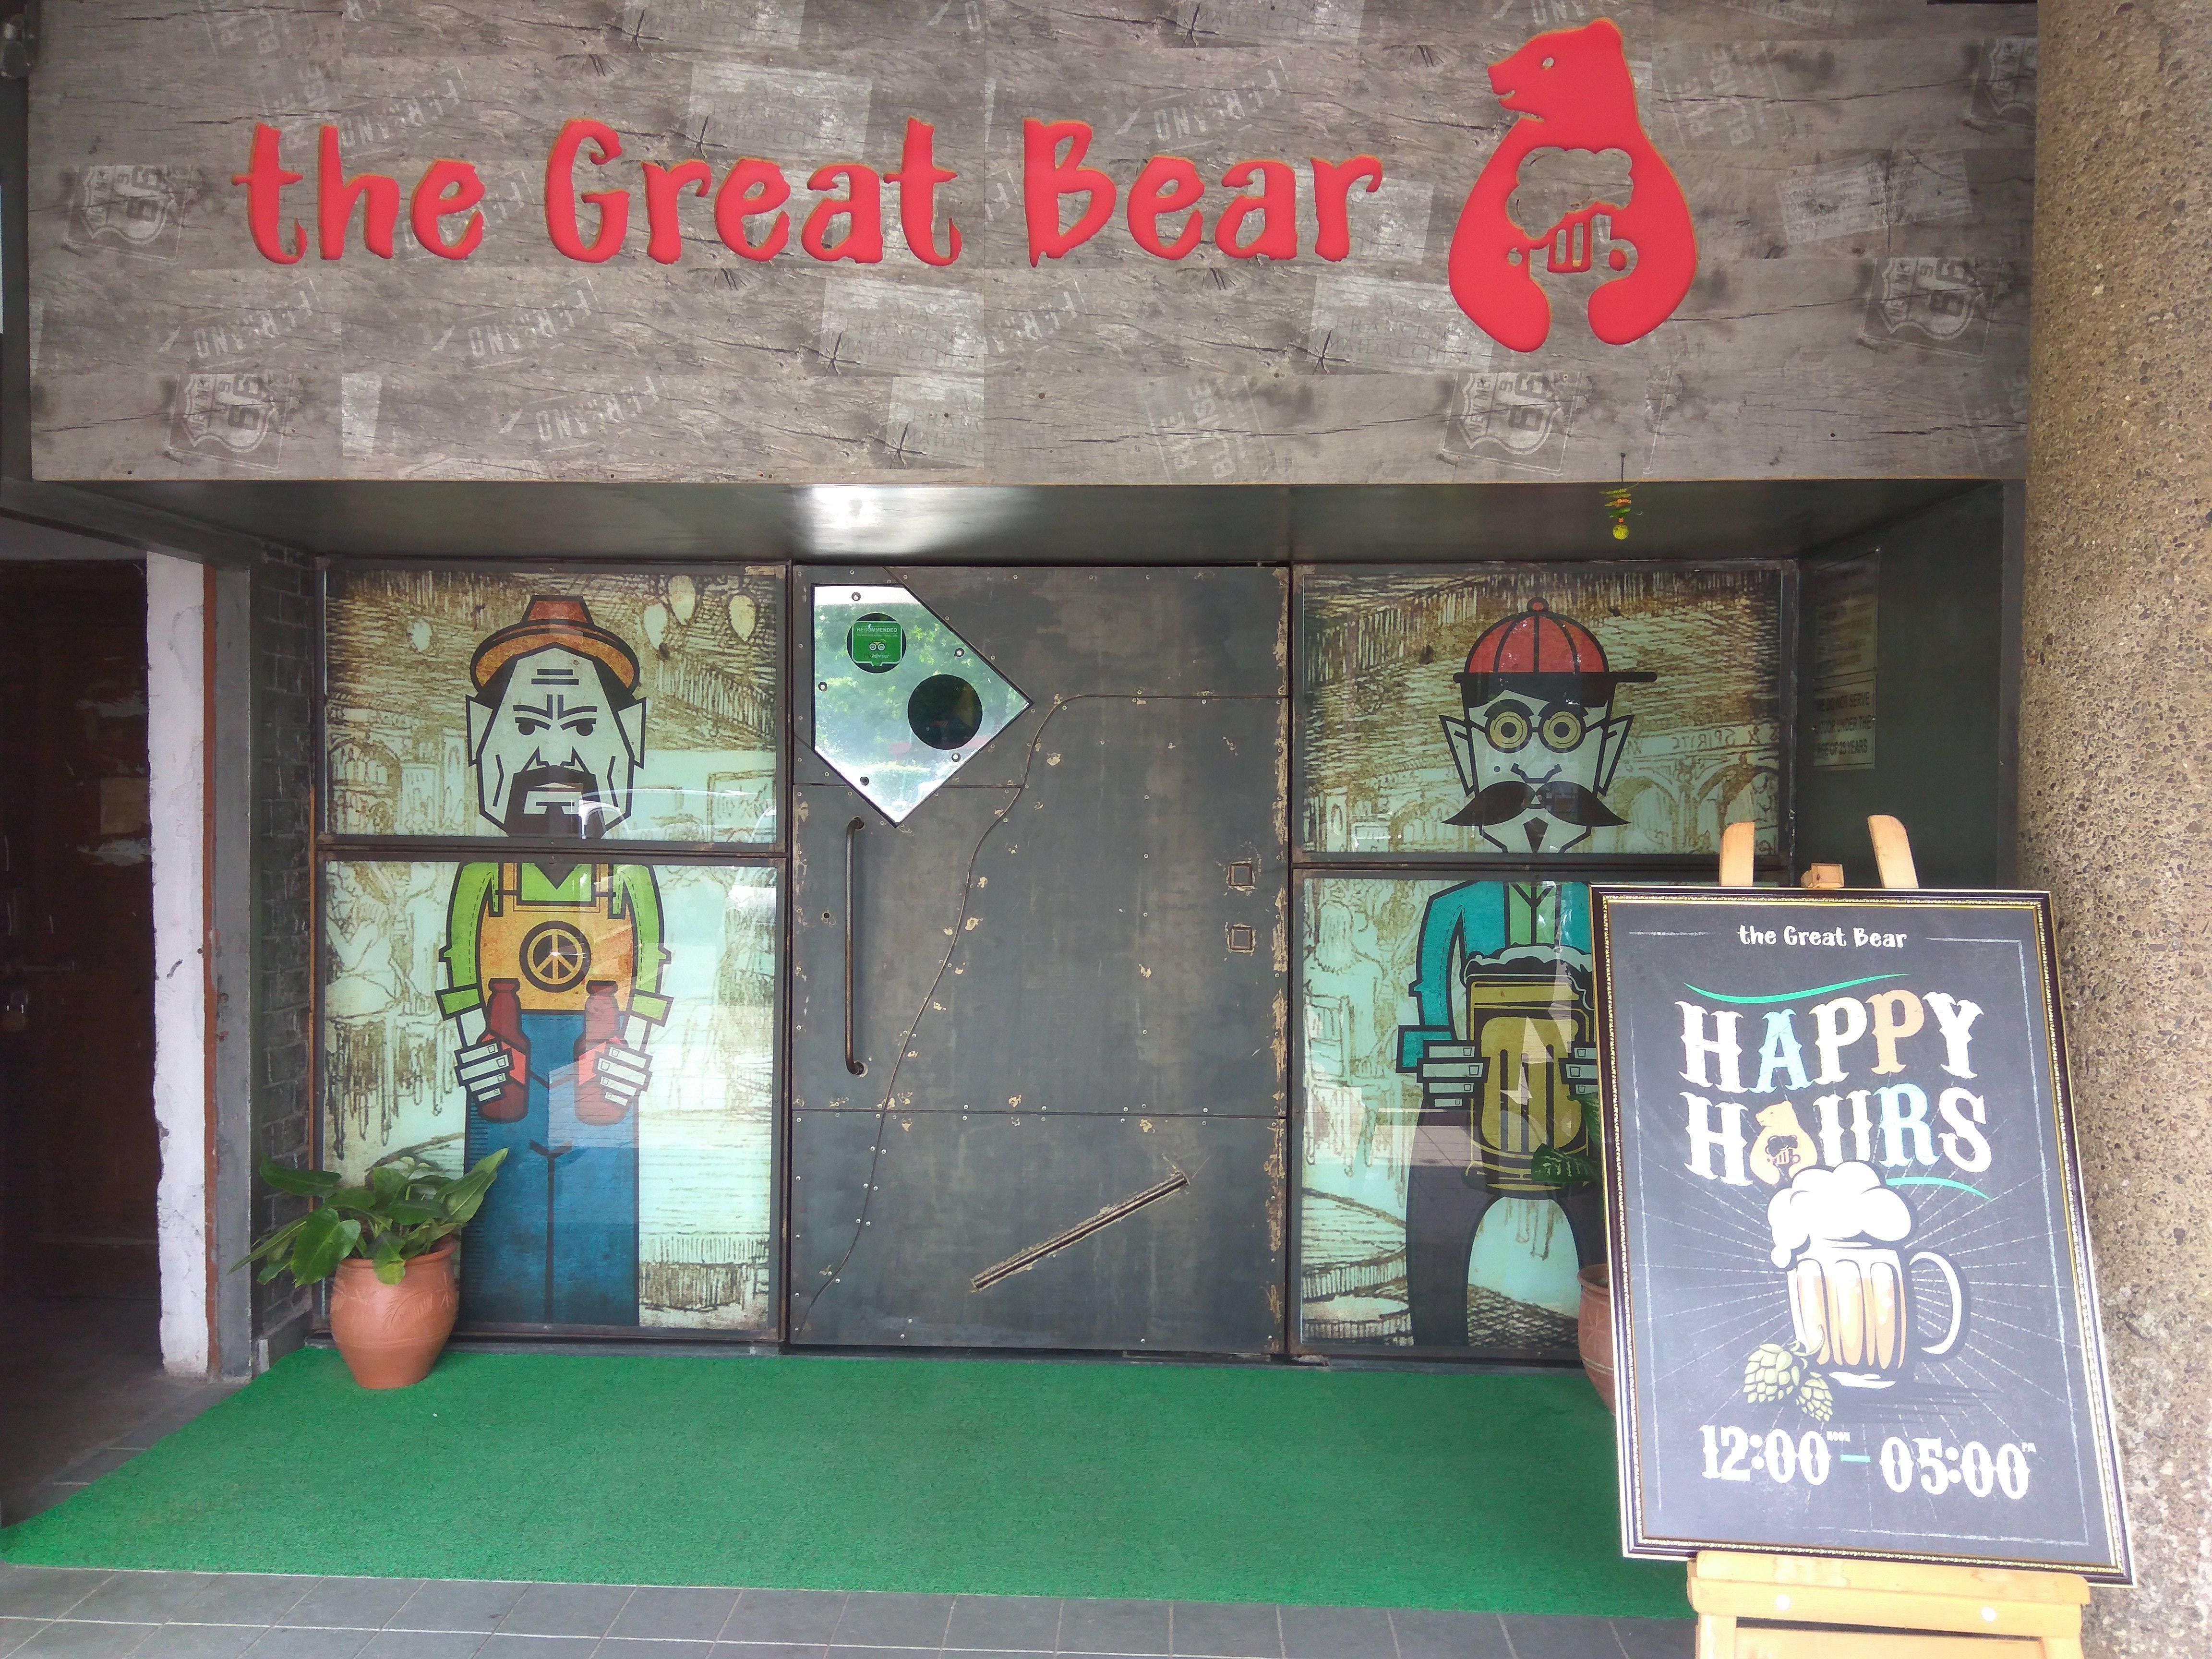 The Great Bear Kitchen Microbrewery in Sector 26 Chandigarh, Chandigarh